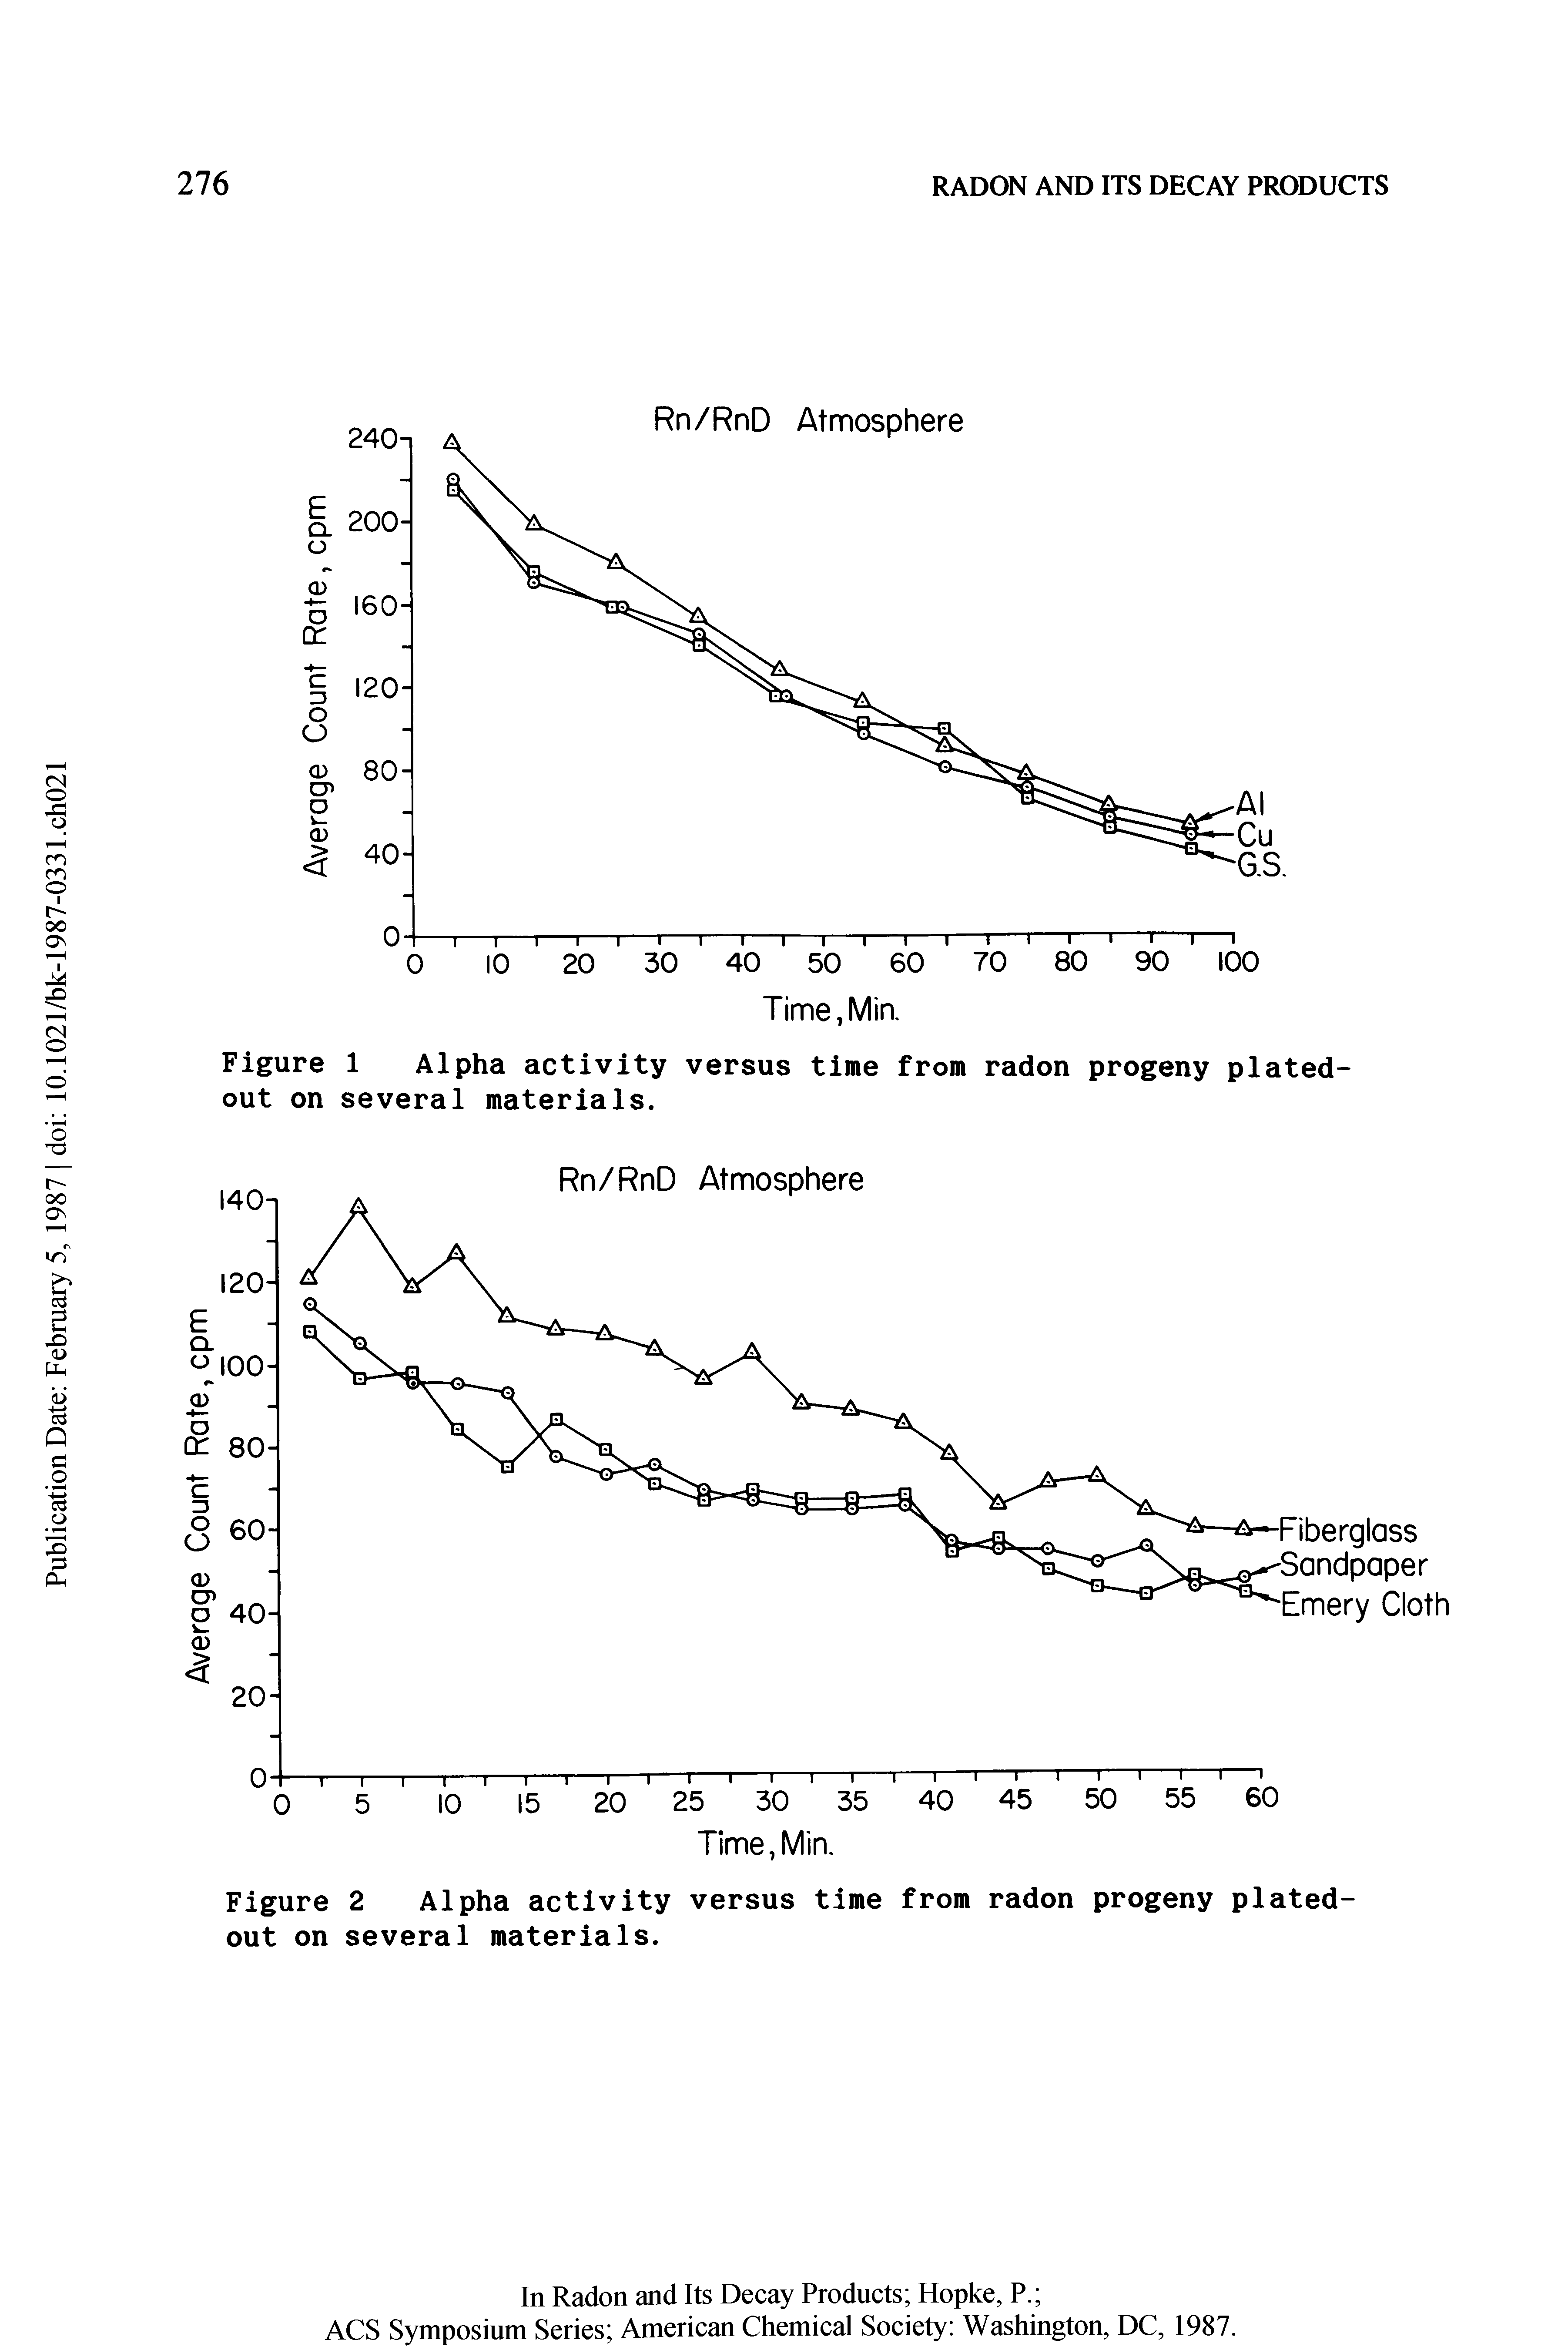 Figure 1 Alpha activity versus time from radon progeny plated-out on several materials.